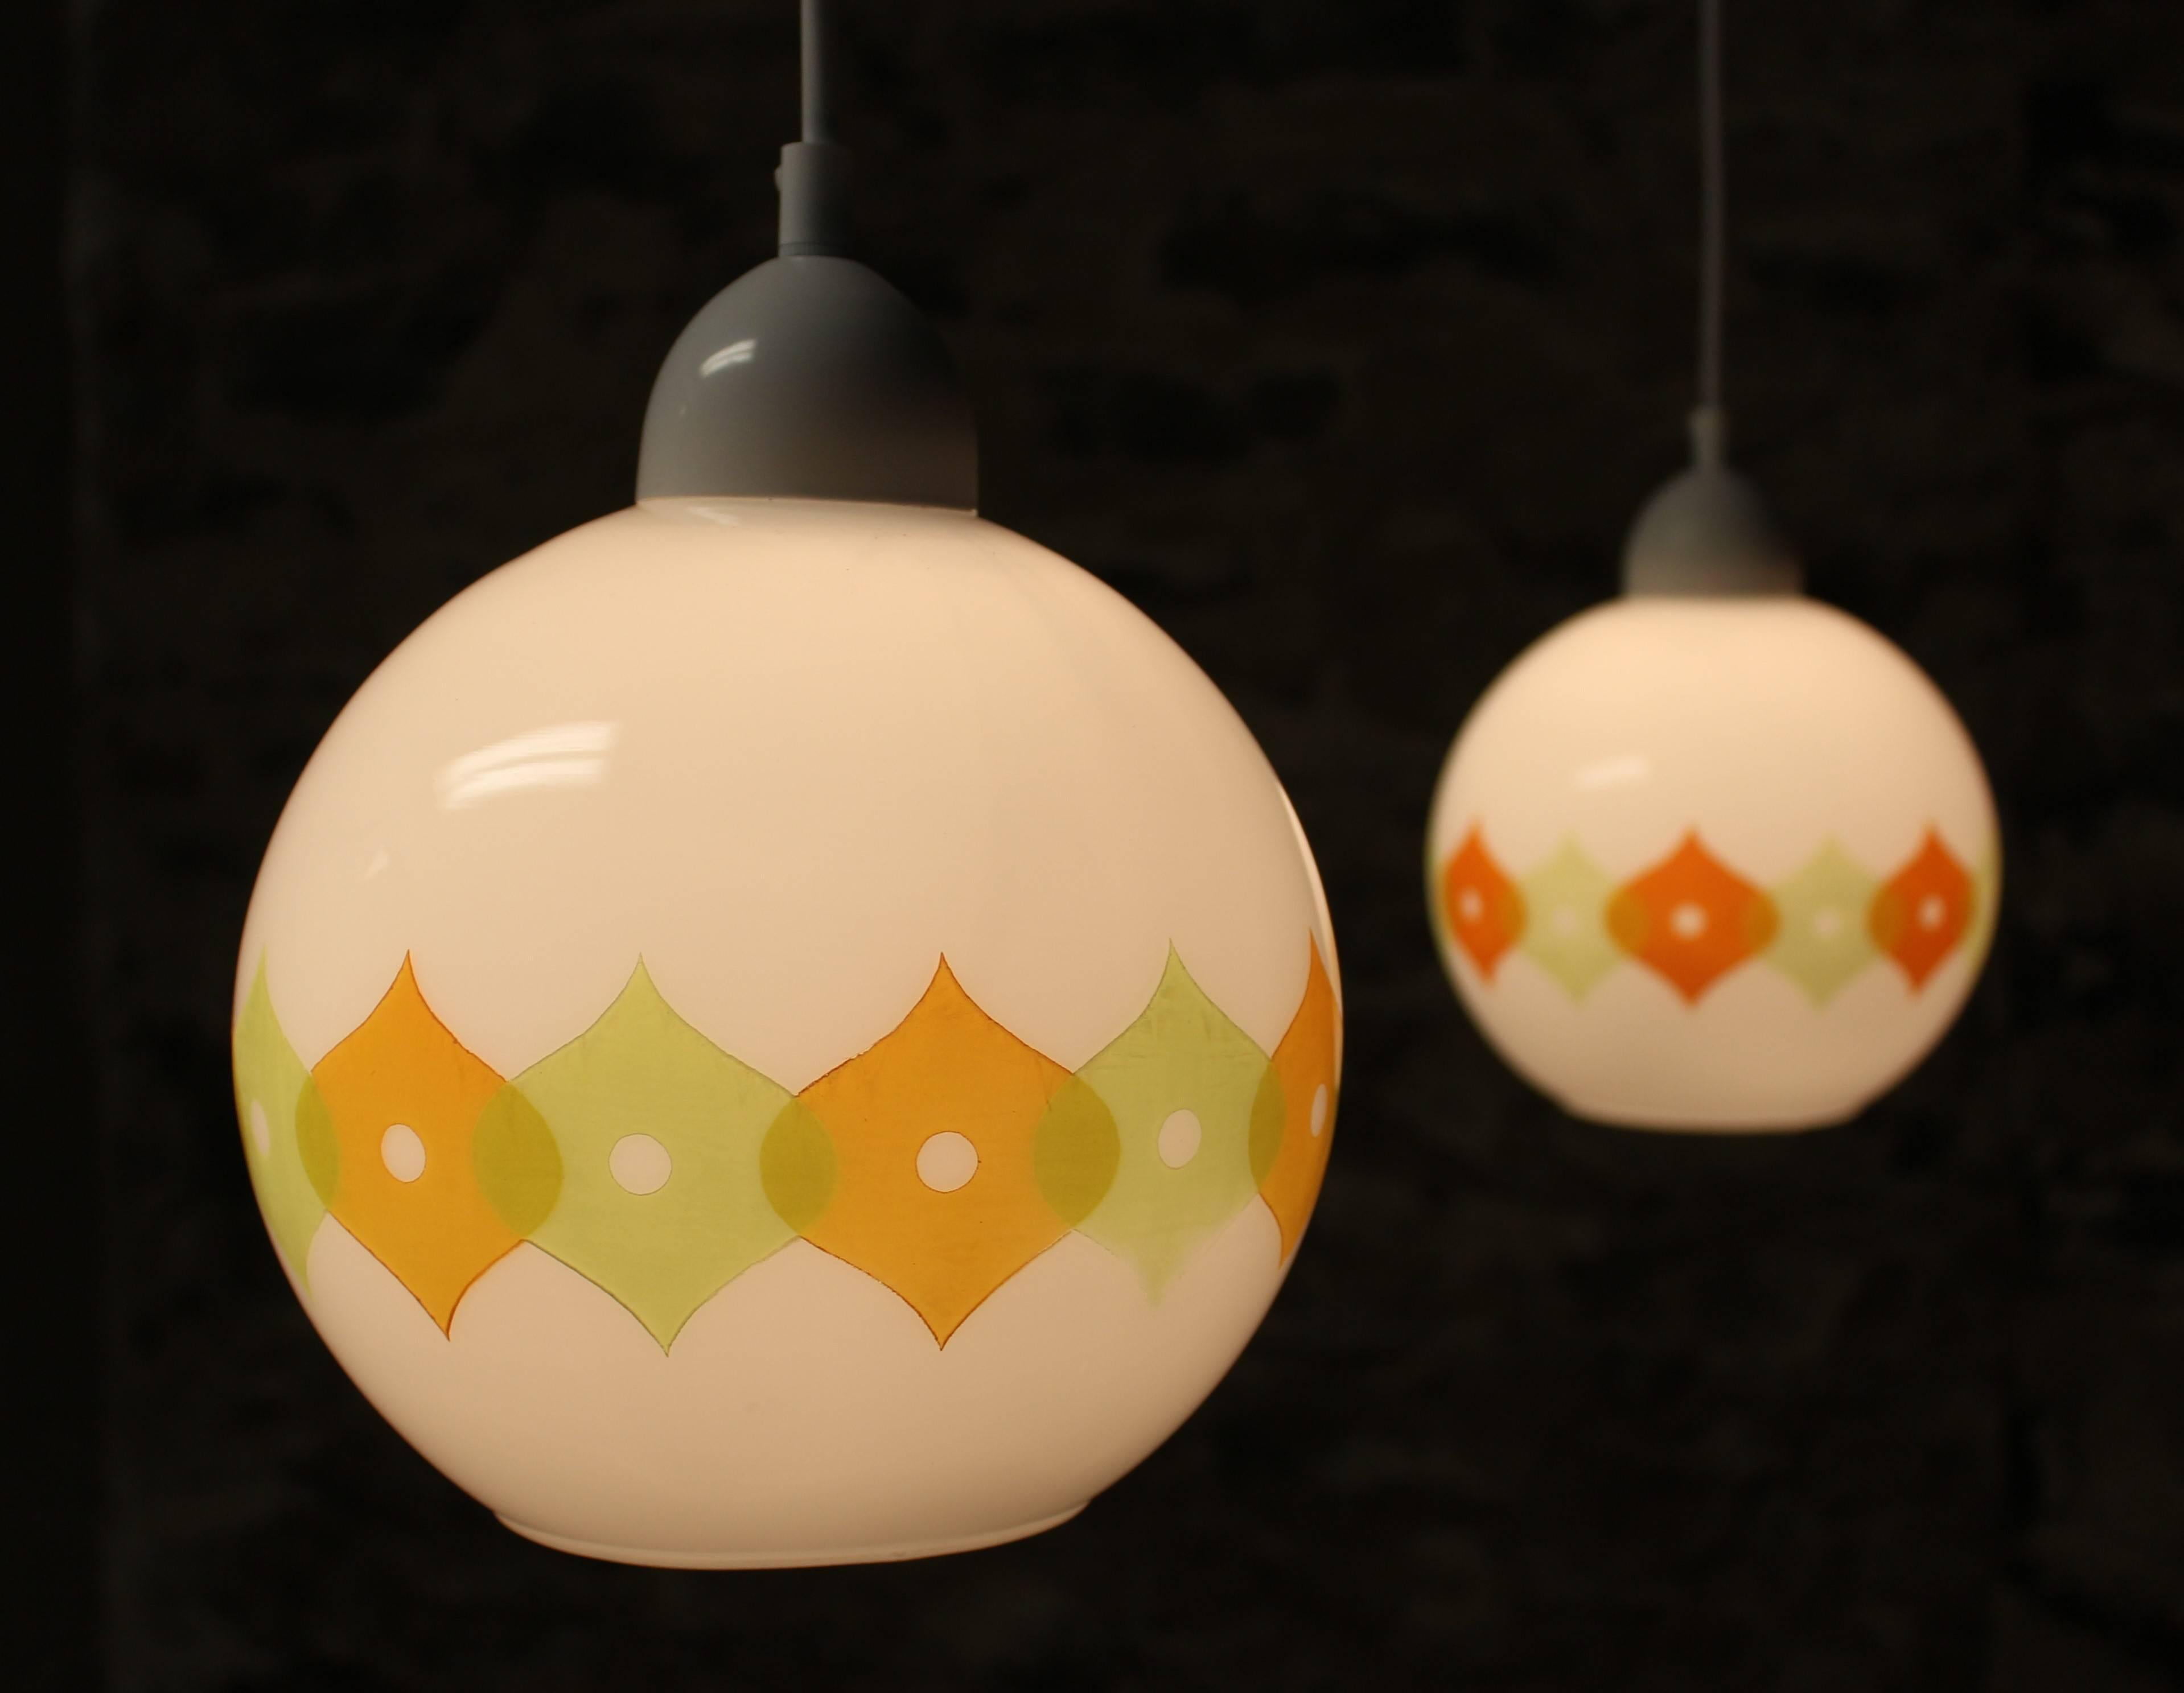 Beautiful handblown French Mid-Century Modern pendant lights. Made by Cvv Vianne Co in France. They feature a hand-painted abstract scrolling design on eggshell white bases. All six lights have a moss green color throughout while three feature more